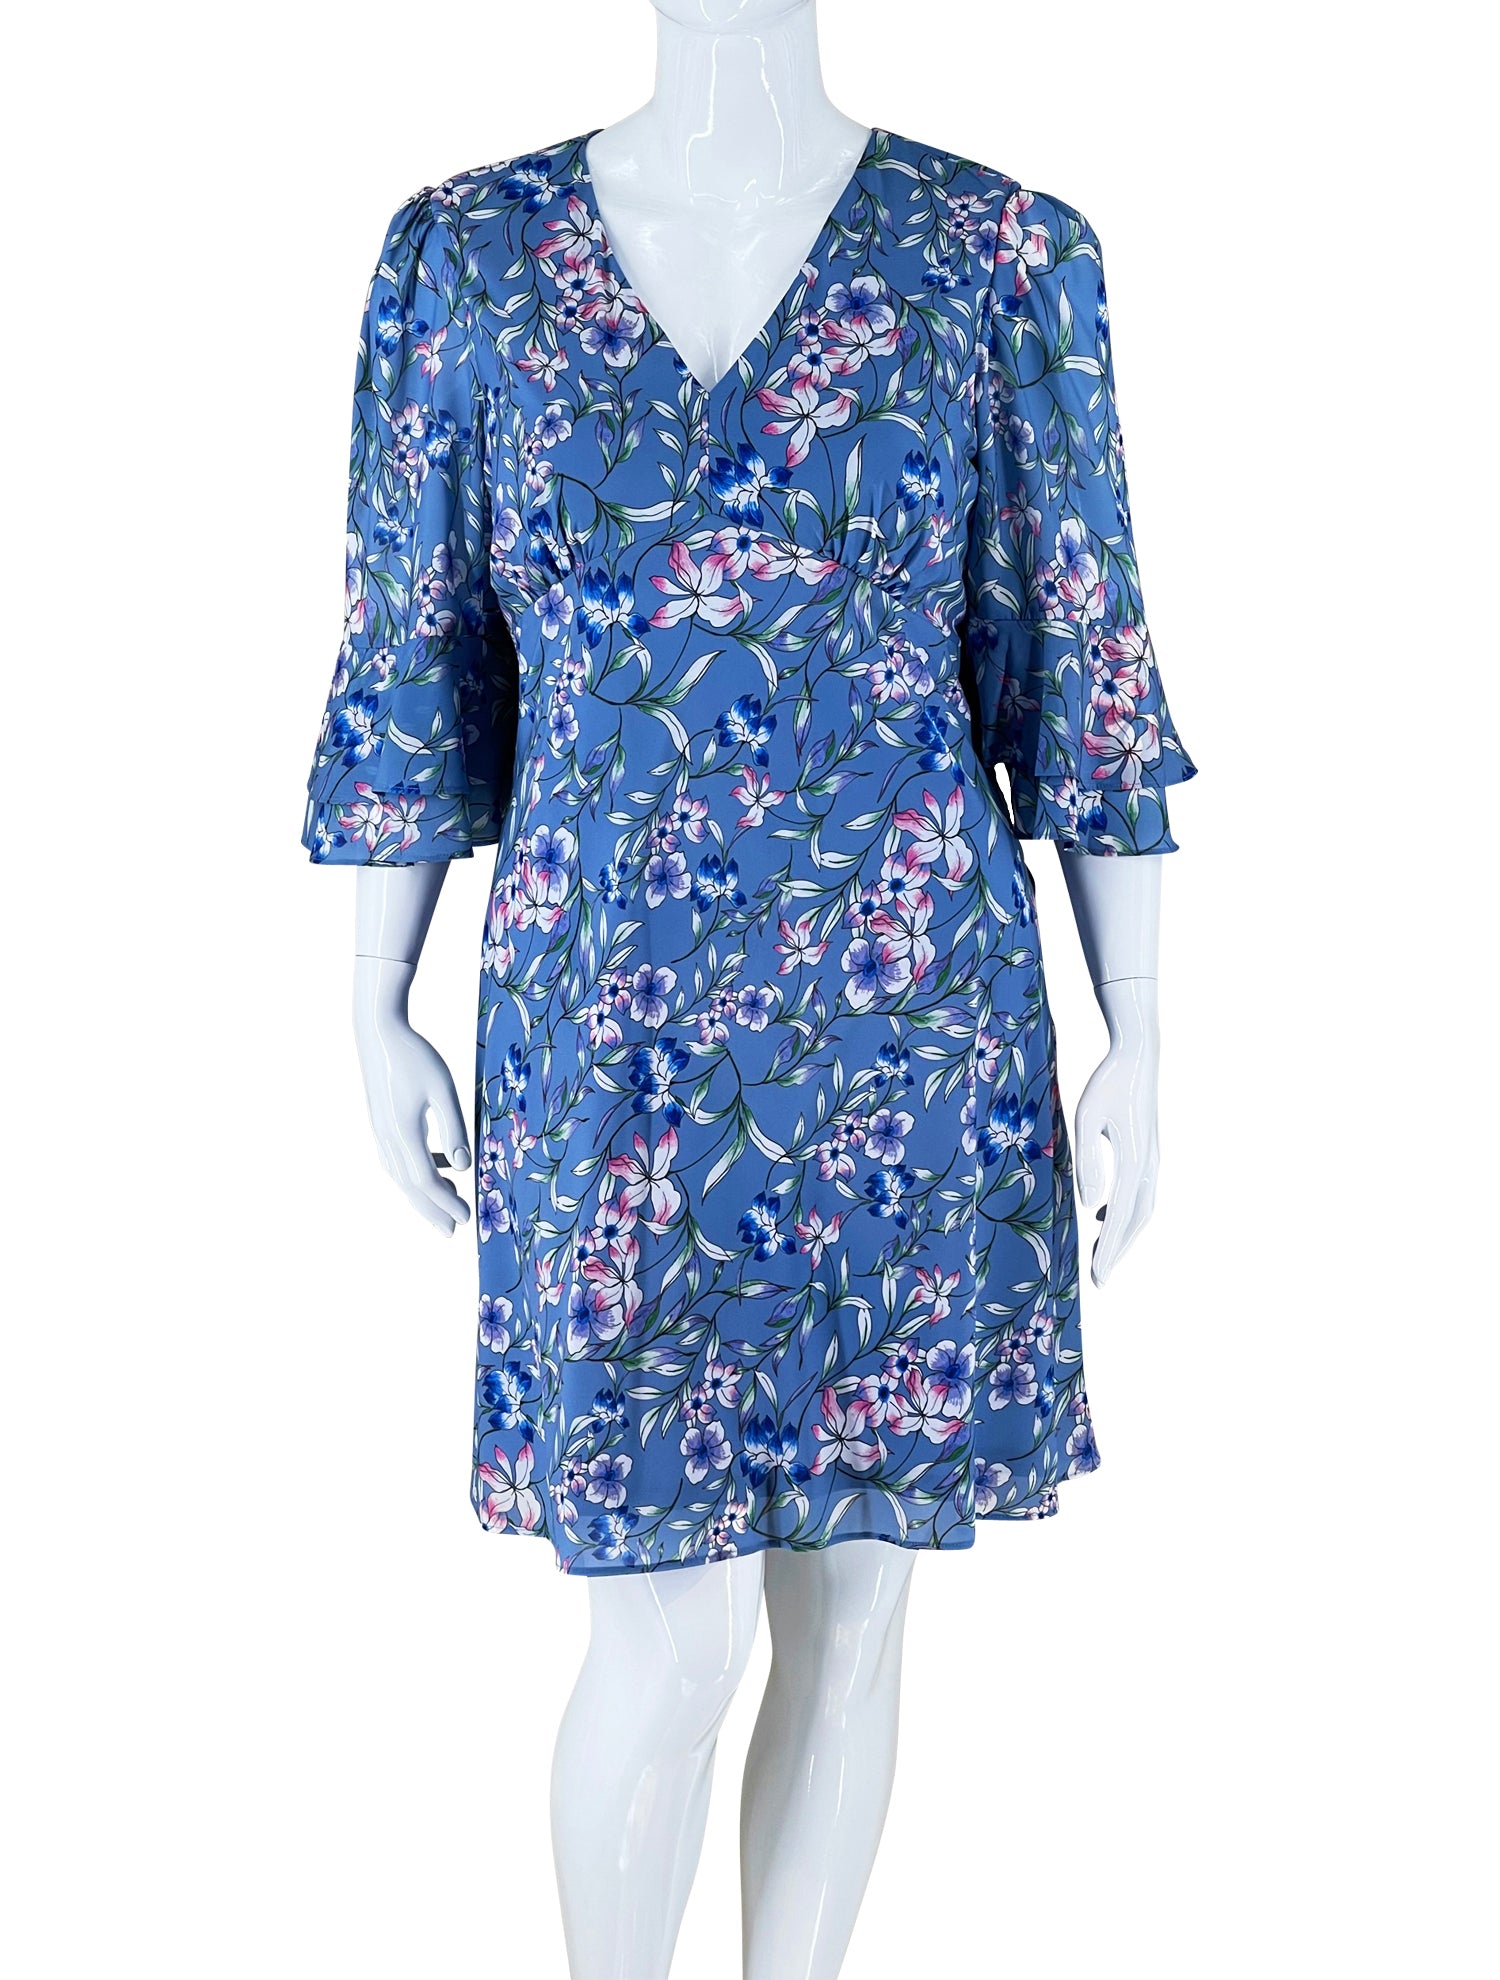 Adrianna Papell Blue Floral Printed Dress